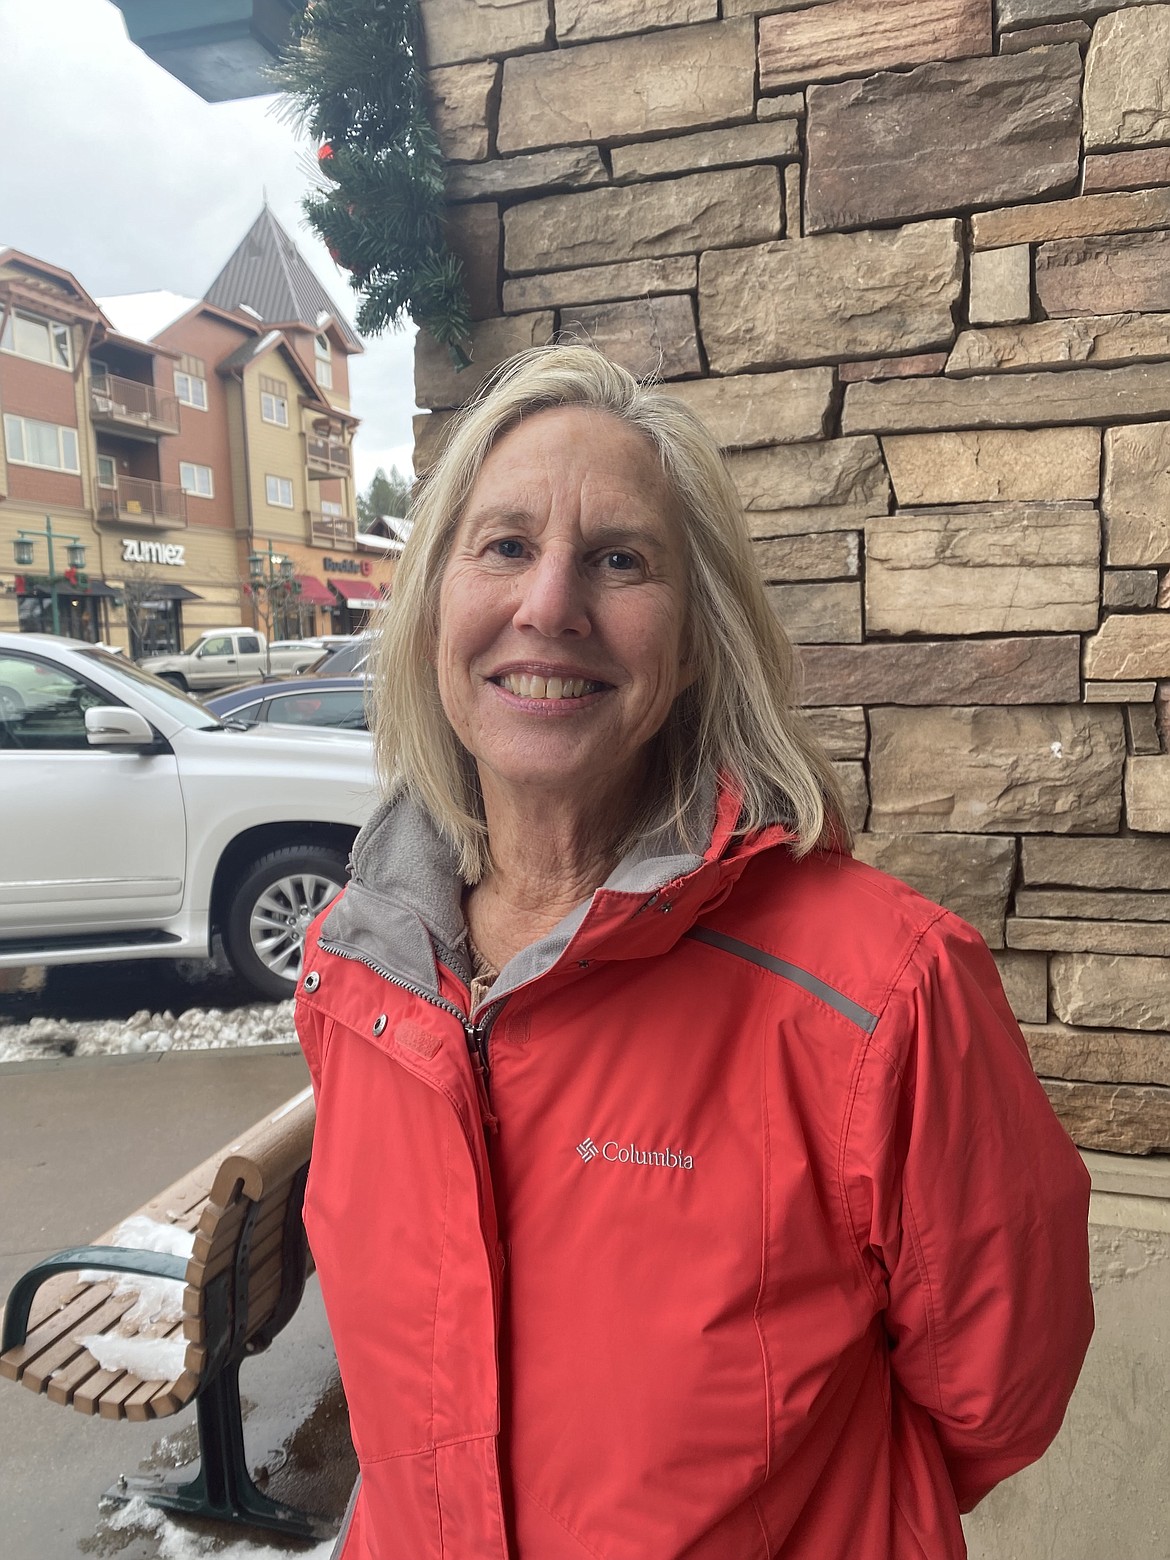 Harrison resident Deanne Miller waits for her husband Wednesday following a hair appointment in the Riverstone shopping area. As a newer arrival to Kootenai County, she hopes the hospitality and friendliness of North Idaho never change.